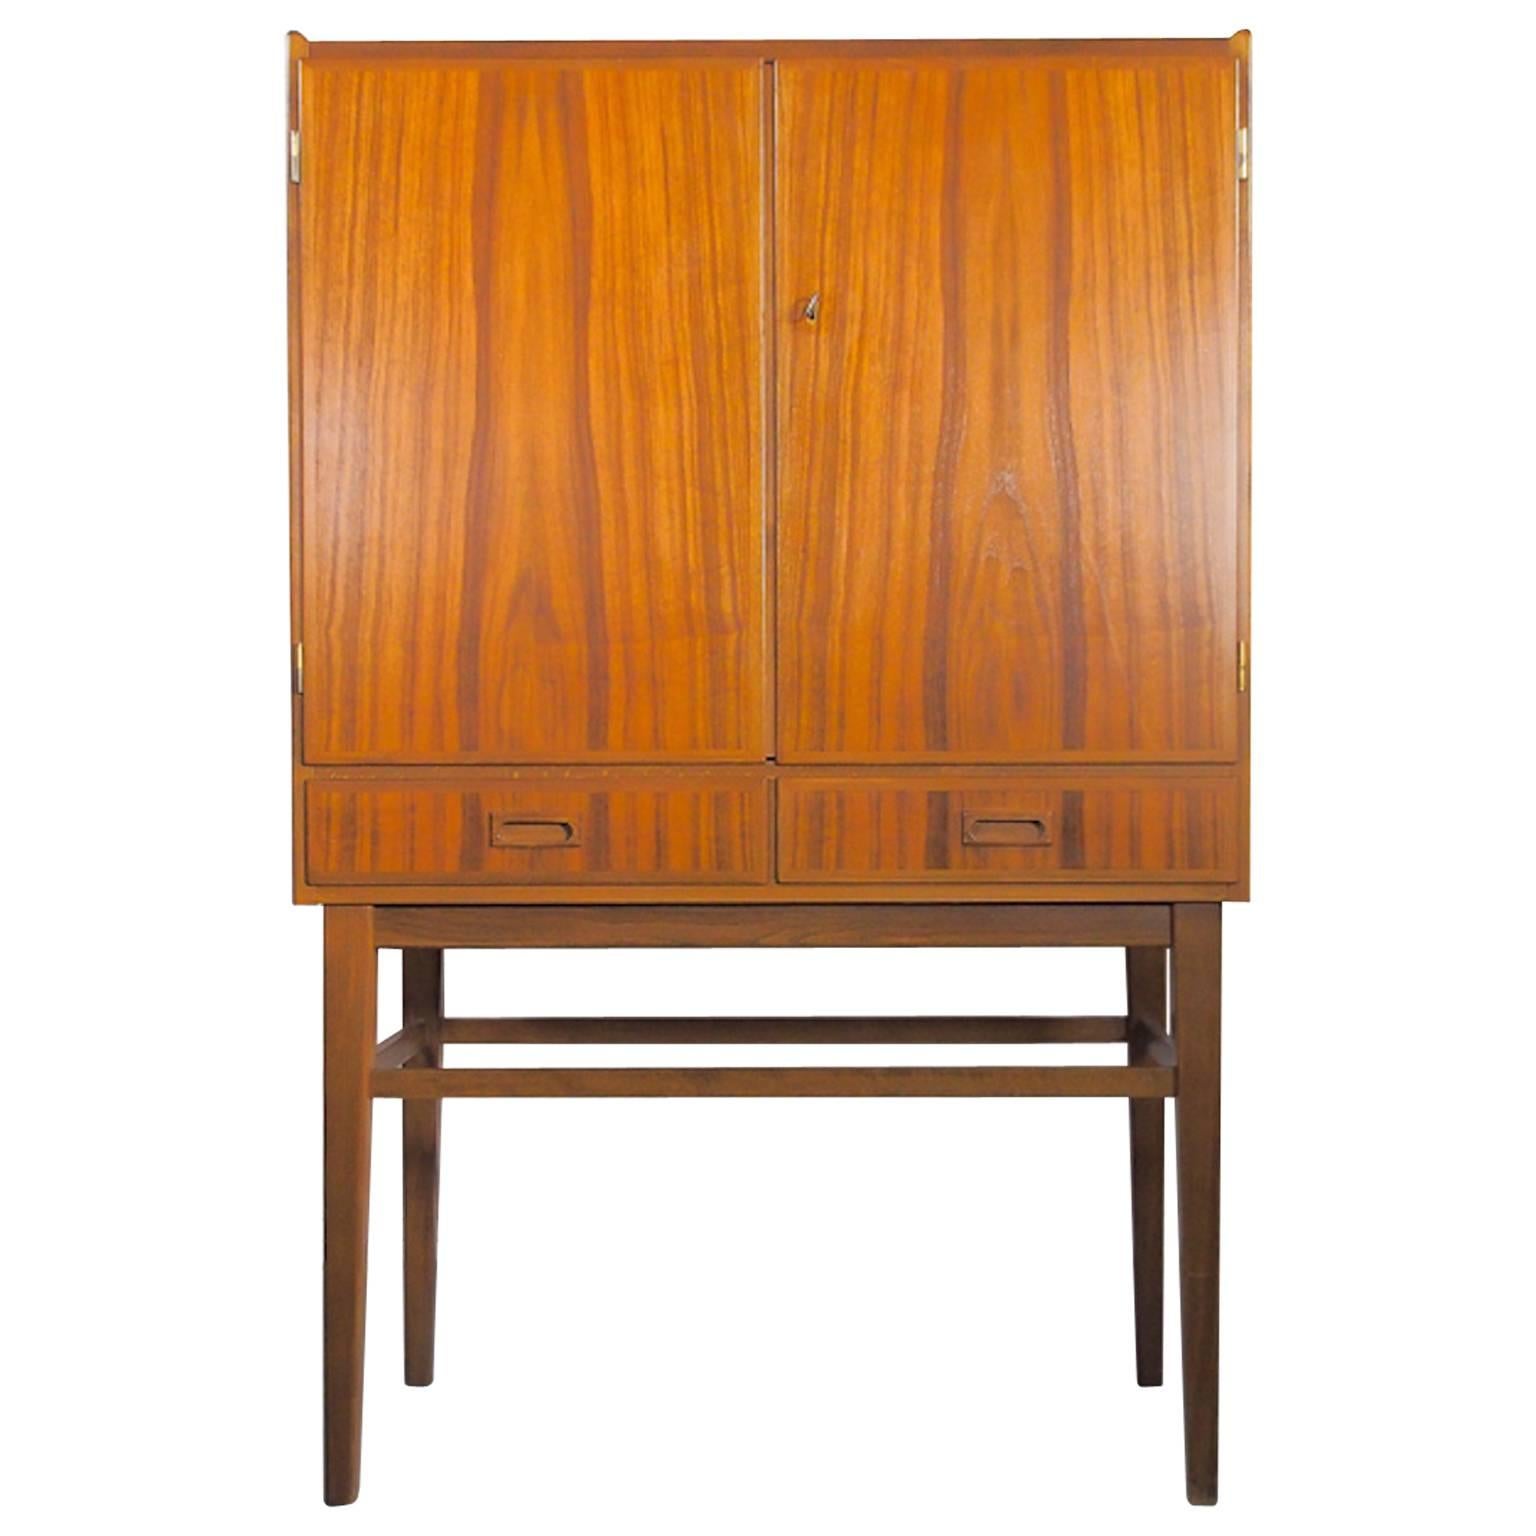 Mid-20th Century Bar Cabinet with Interior Mirrors and Light